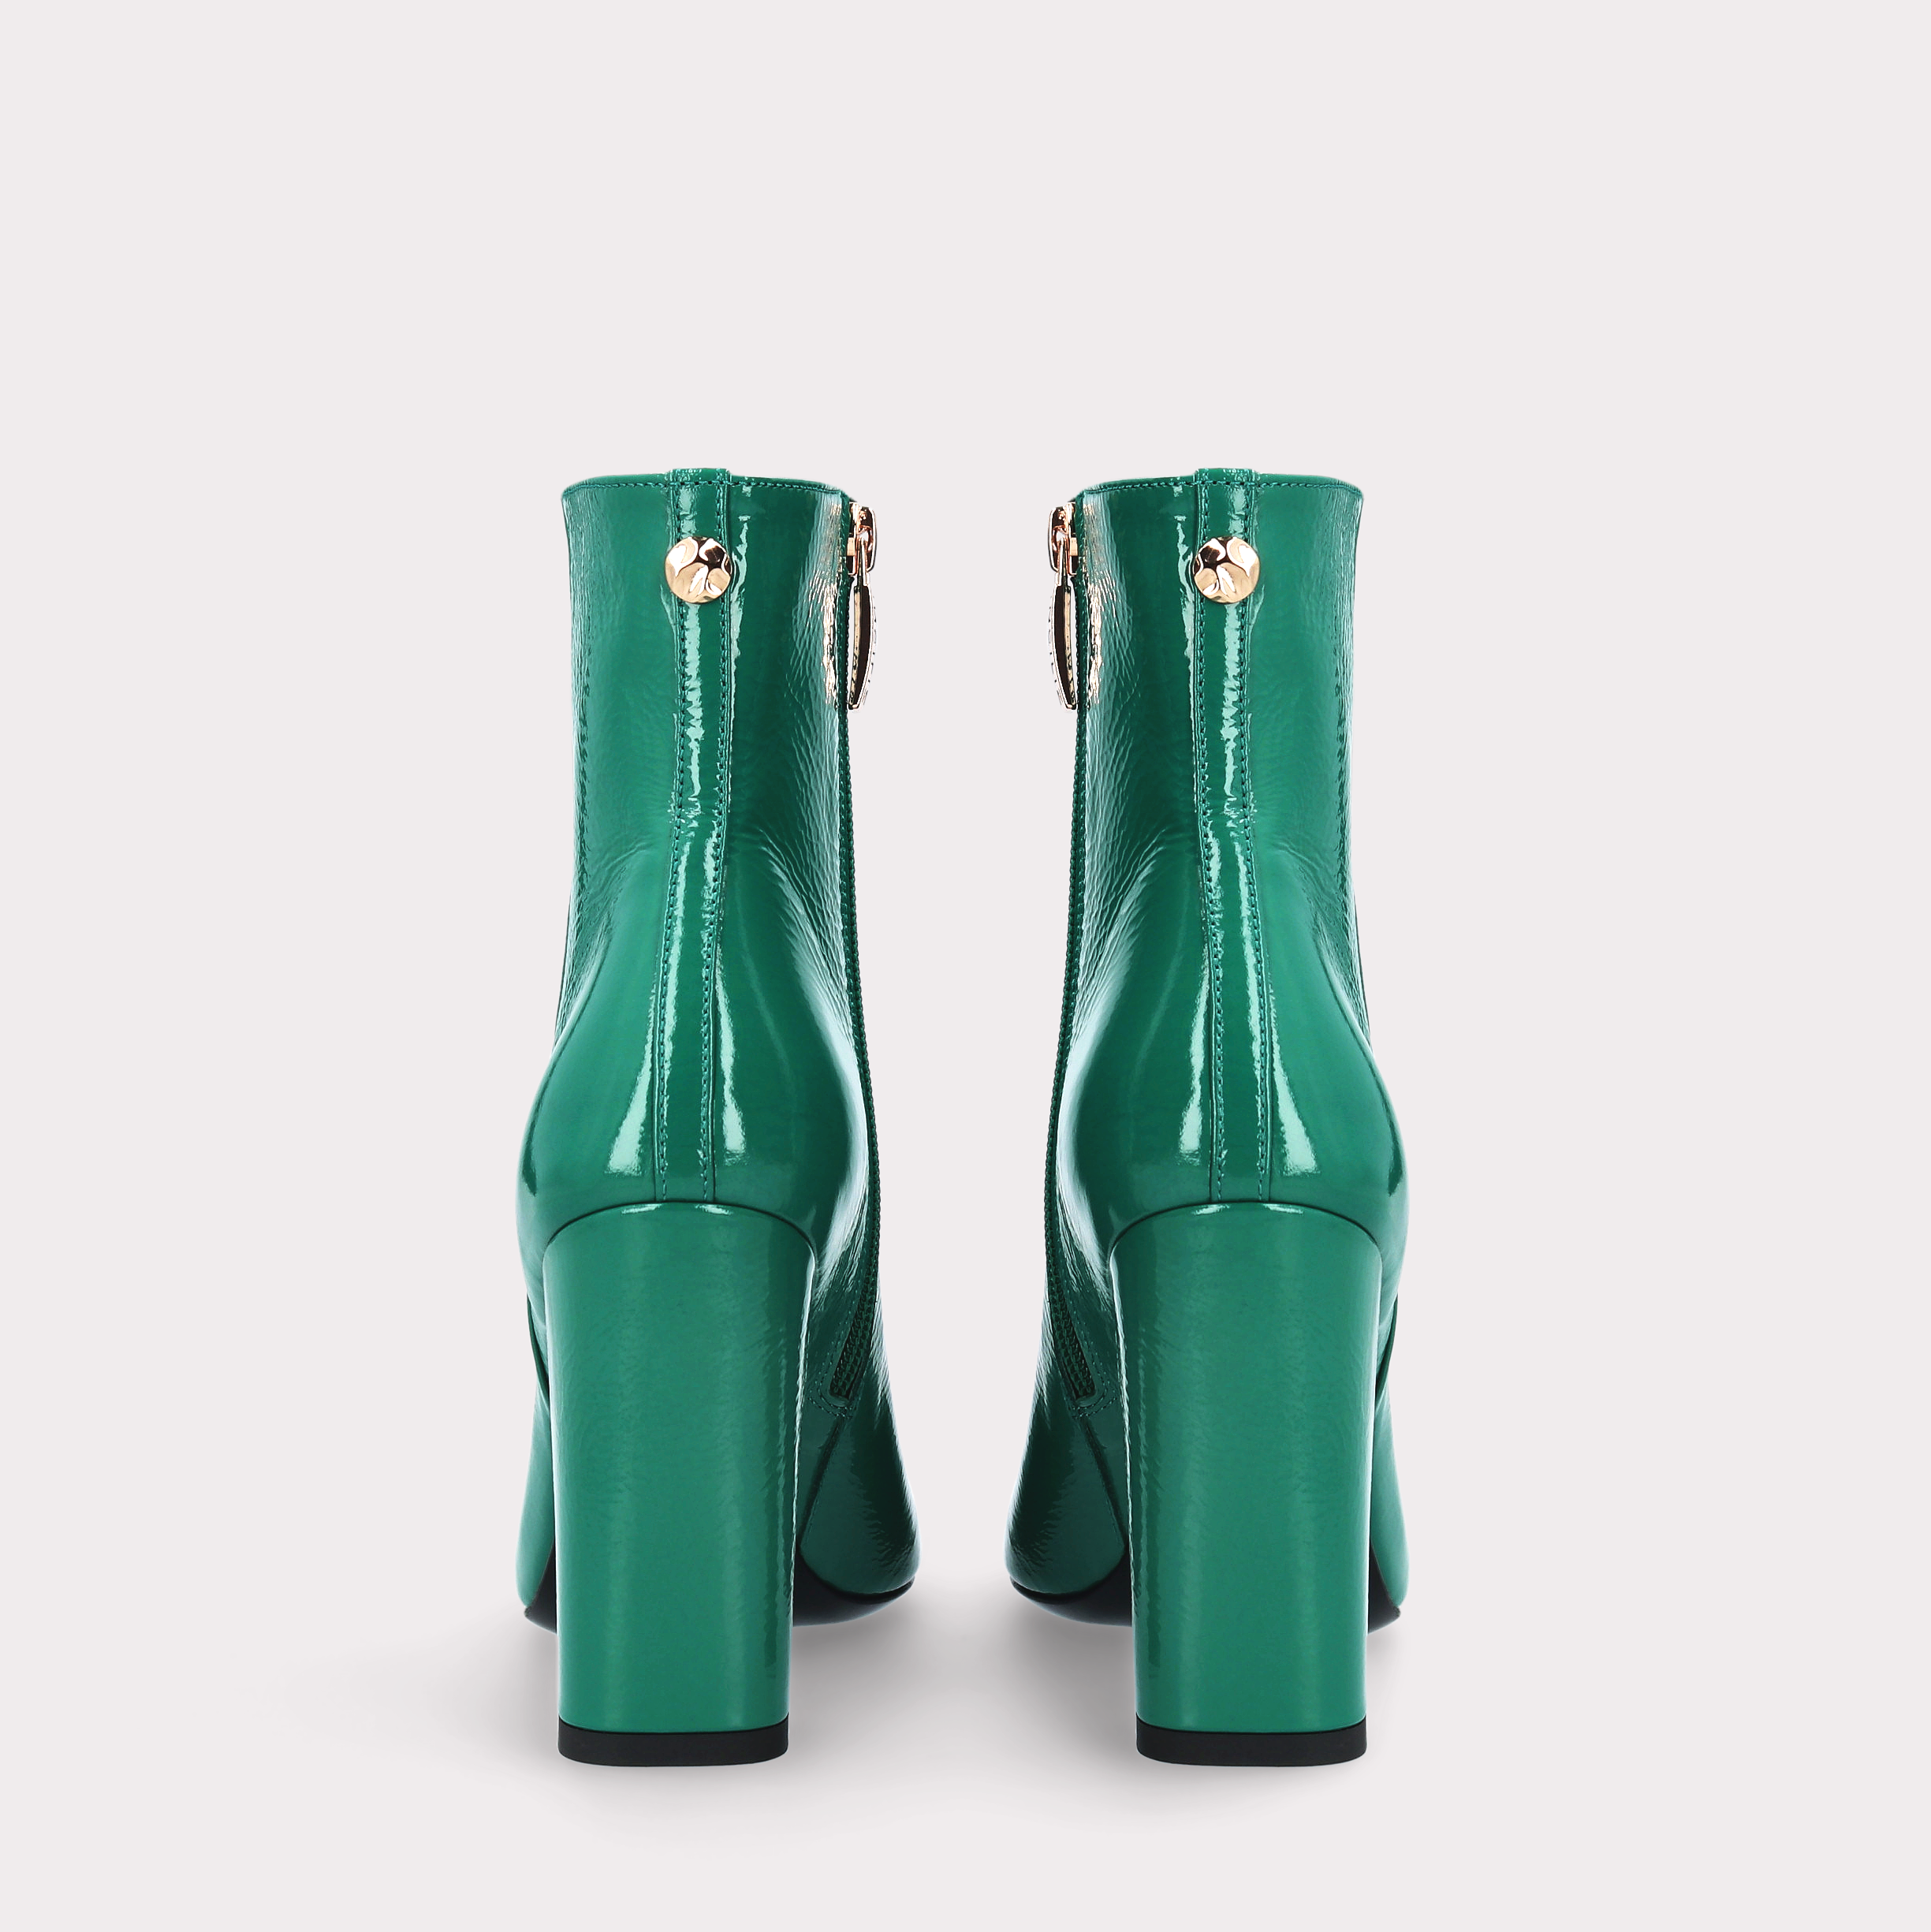 DELMA ZIP 02 GREEN CRUSHED PATENT LEATHER ANKLE BOOTS